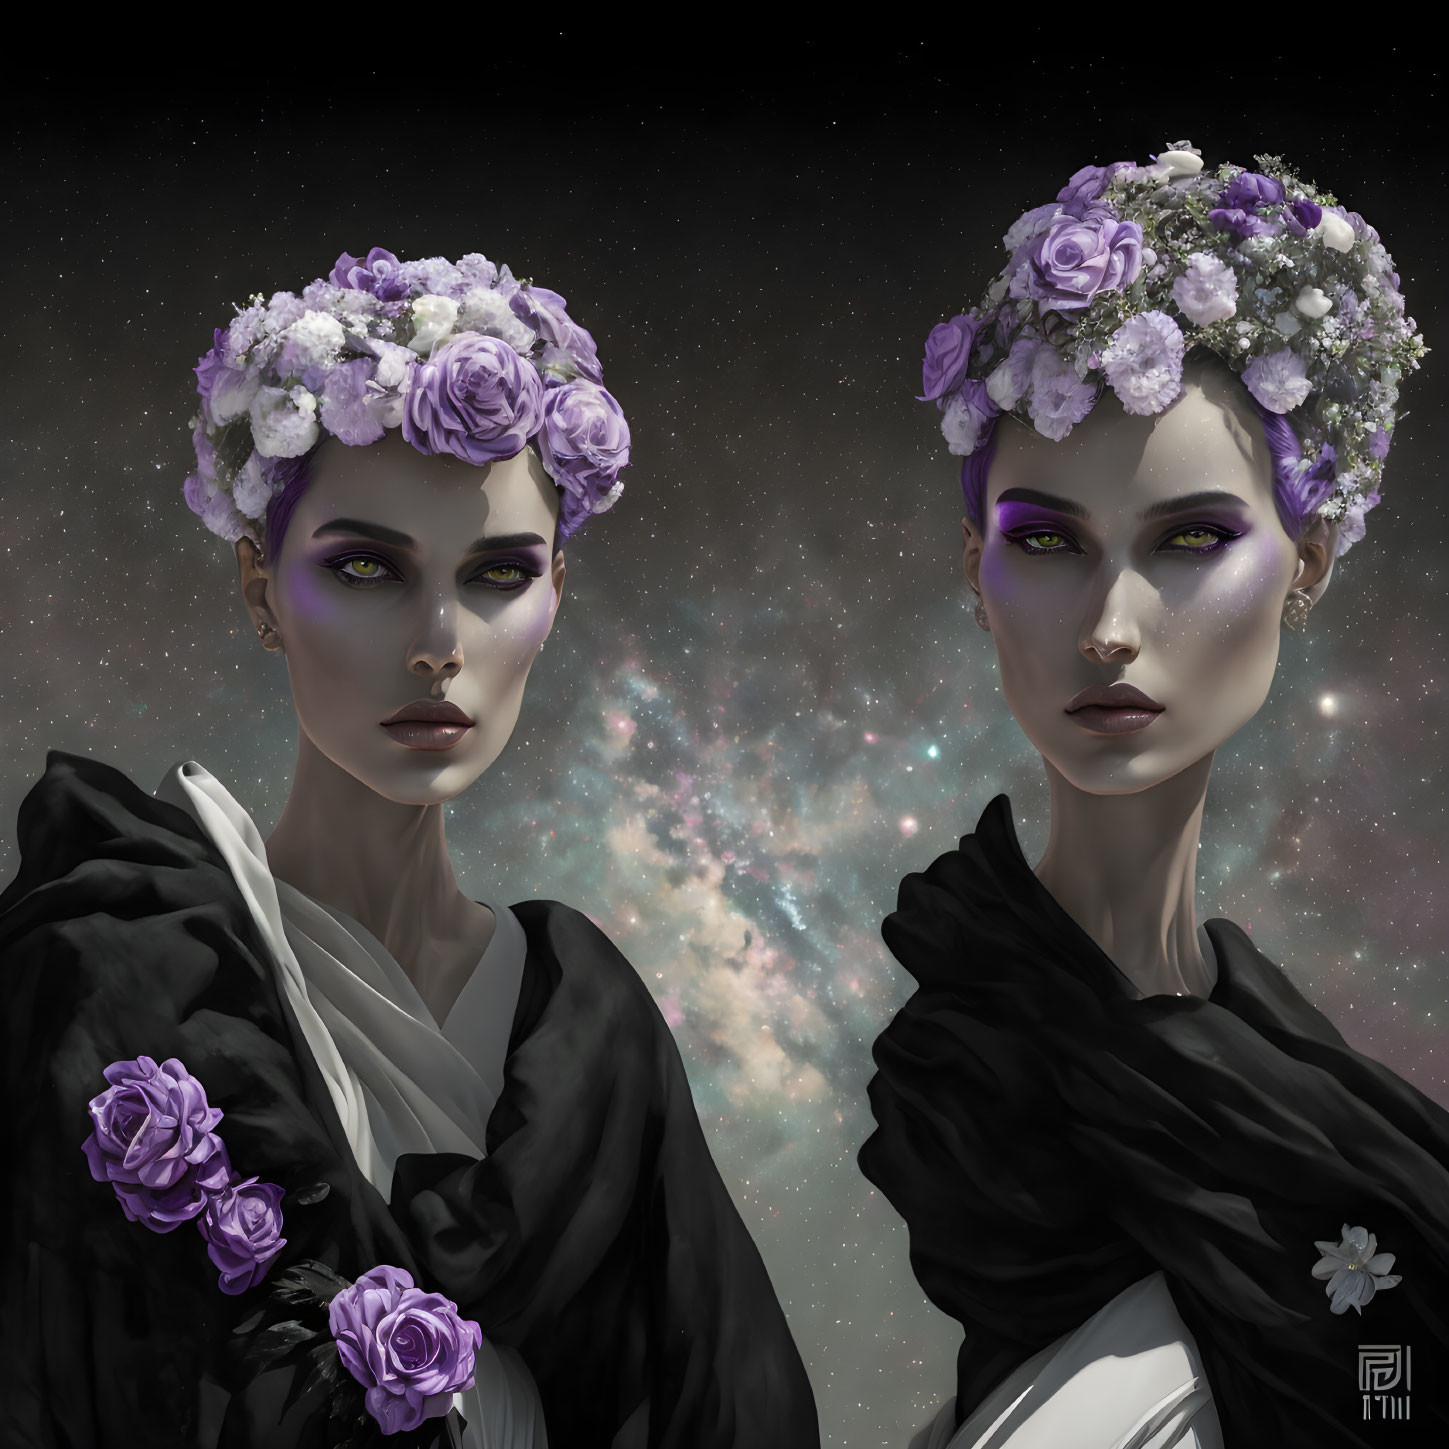 Identical Women in Flower Crowns with Violet Eyes on Starry Background